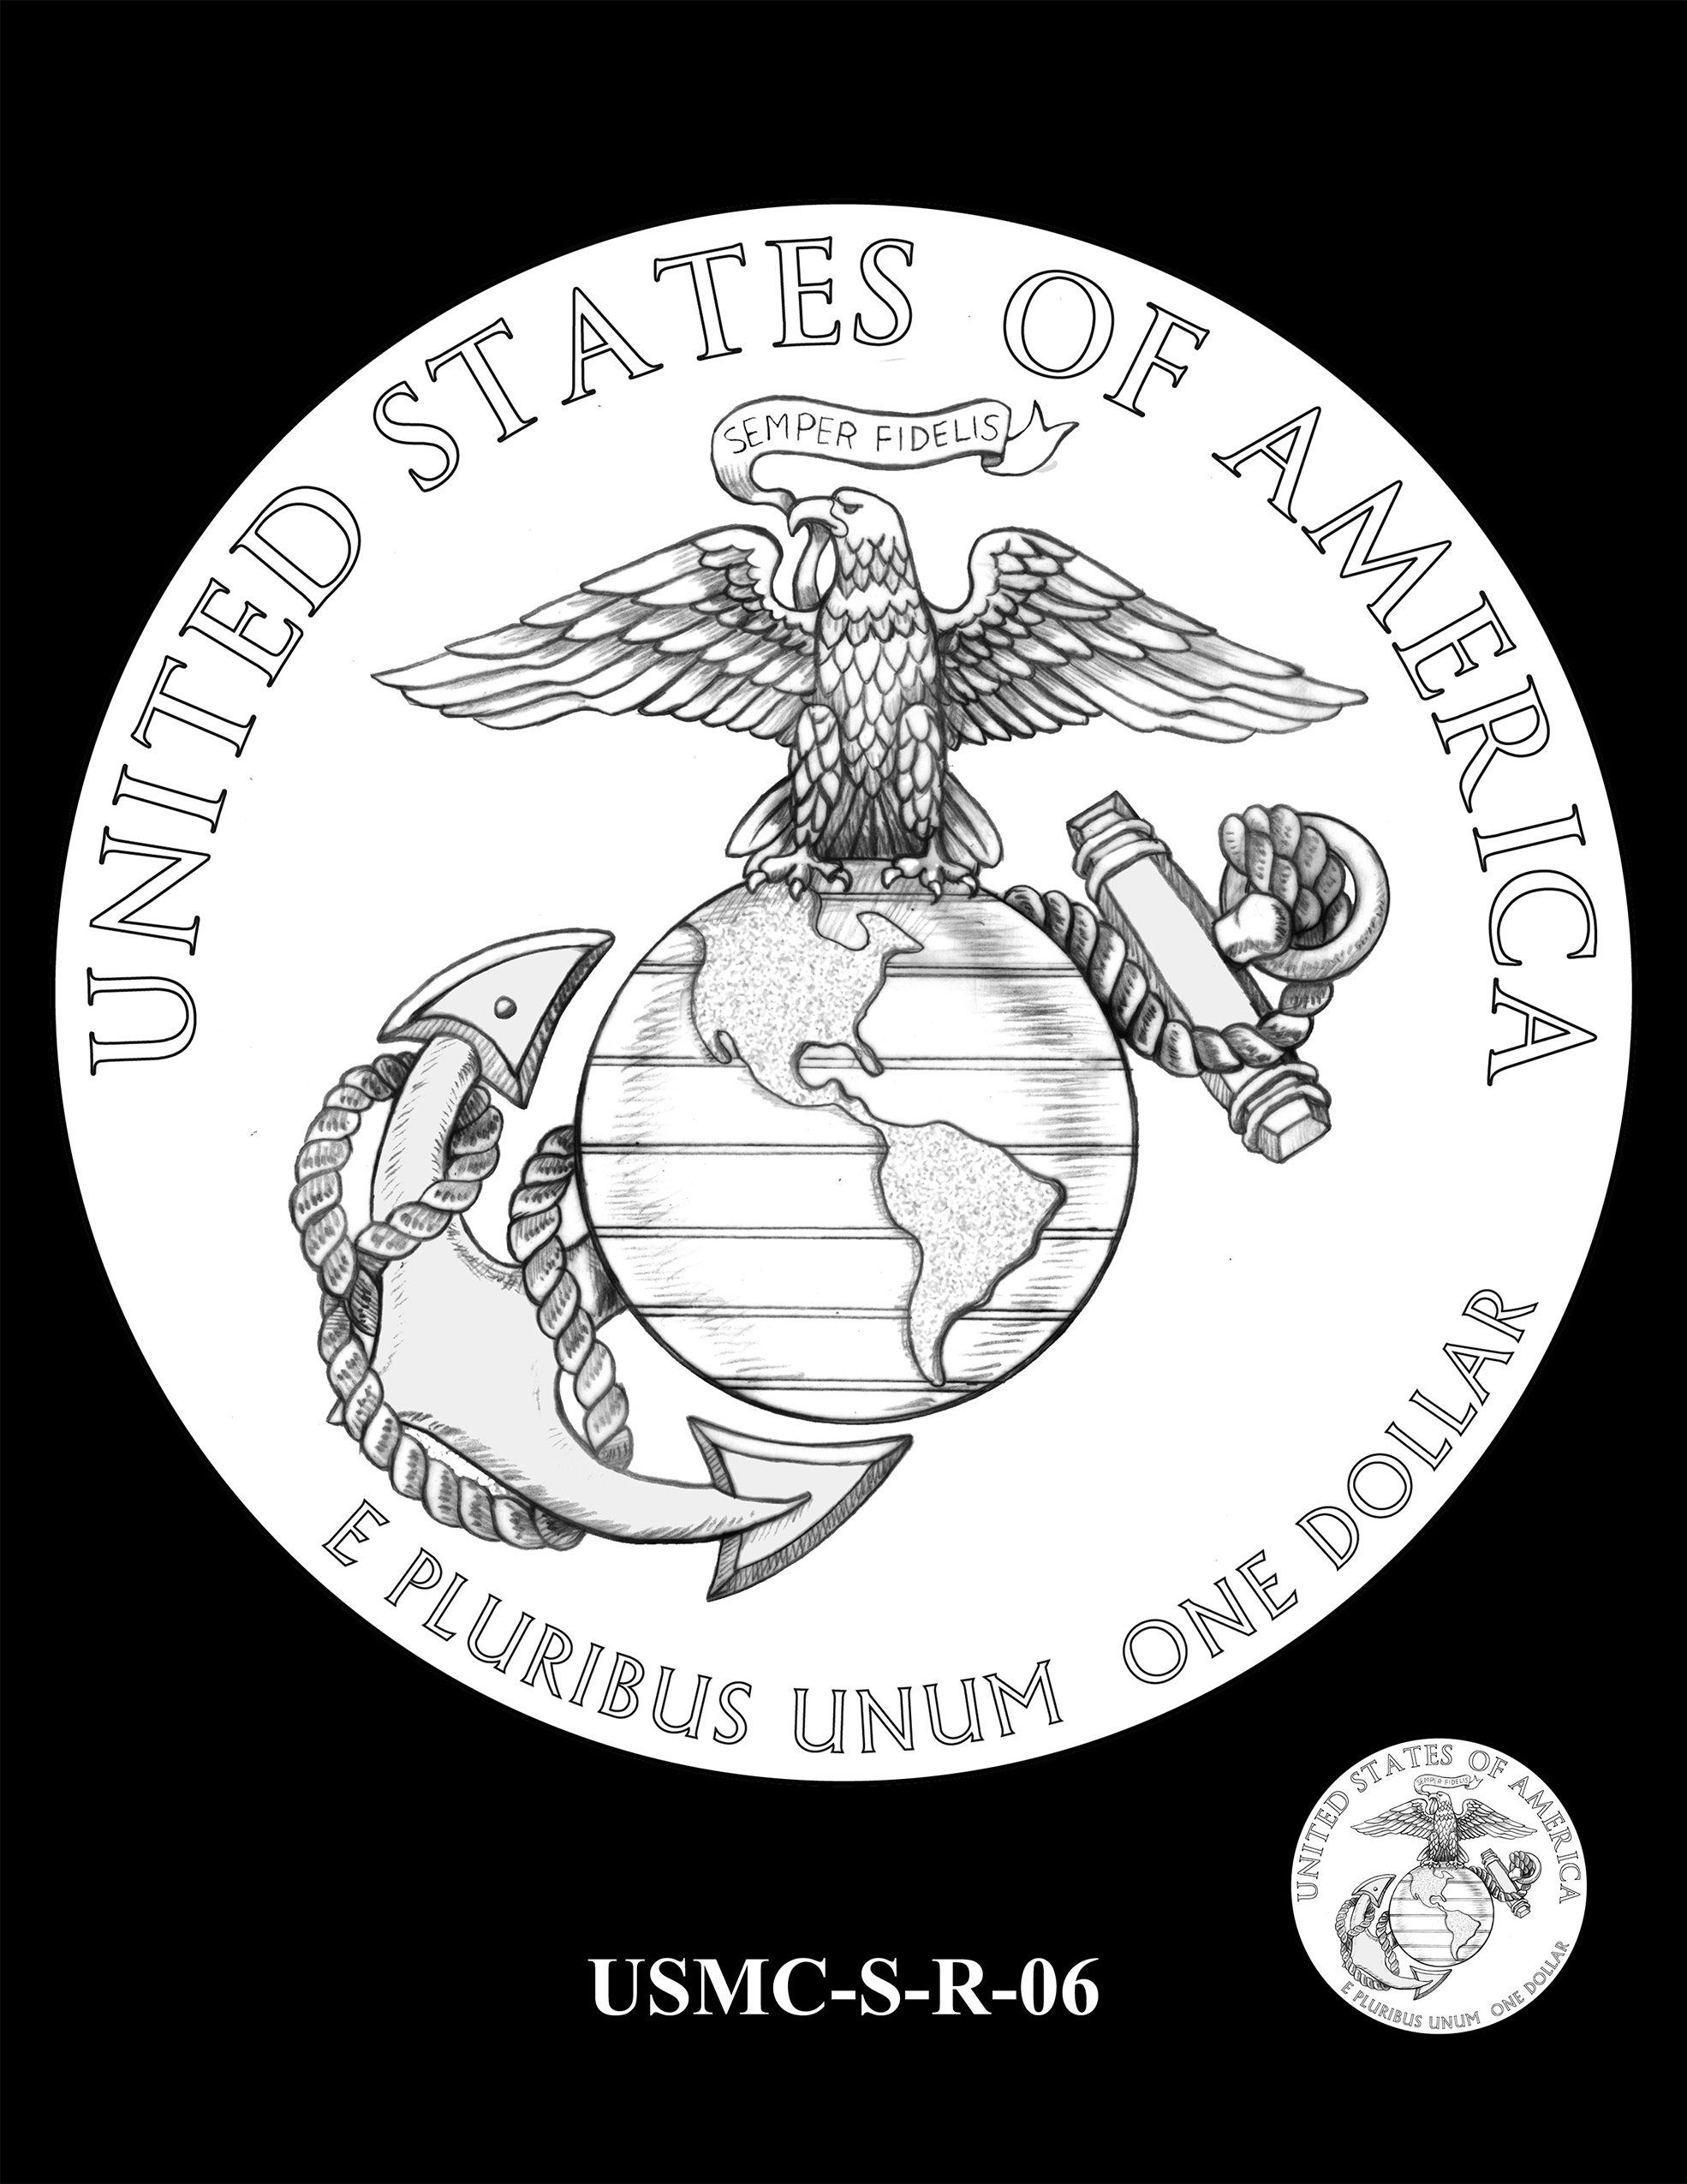 USMC-S-R-06 -- 250th Anniversary of the United States Marine Corps - Silver